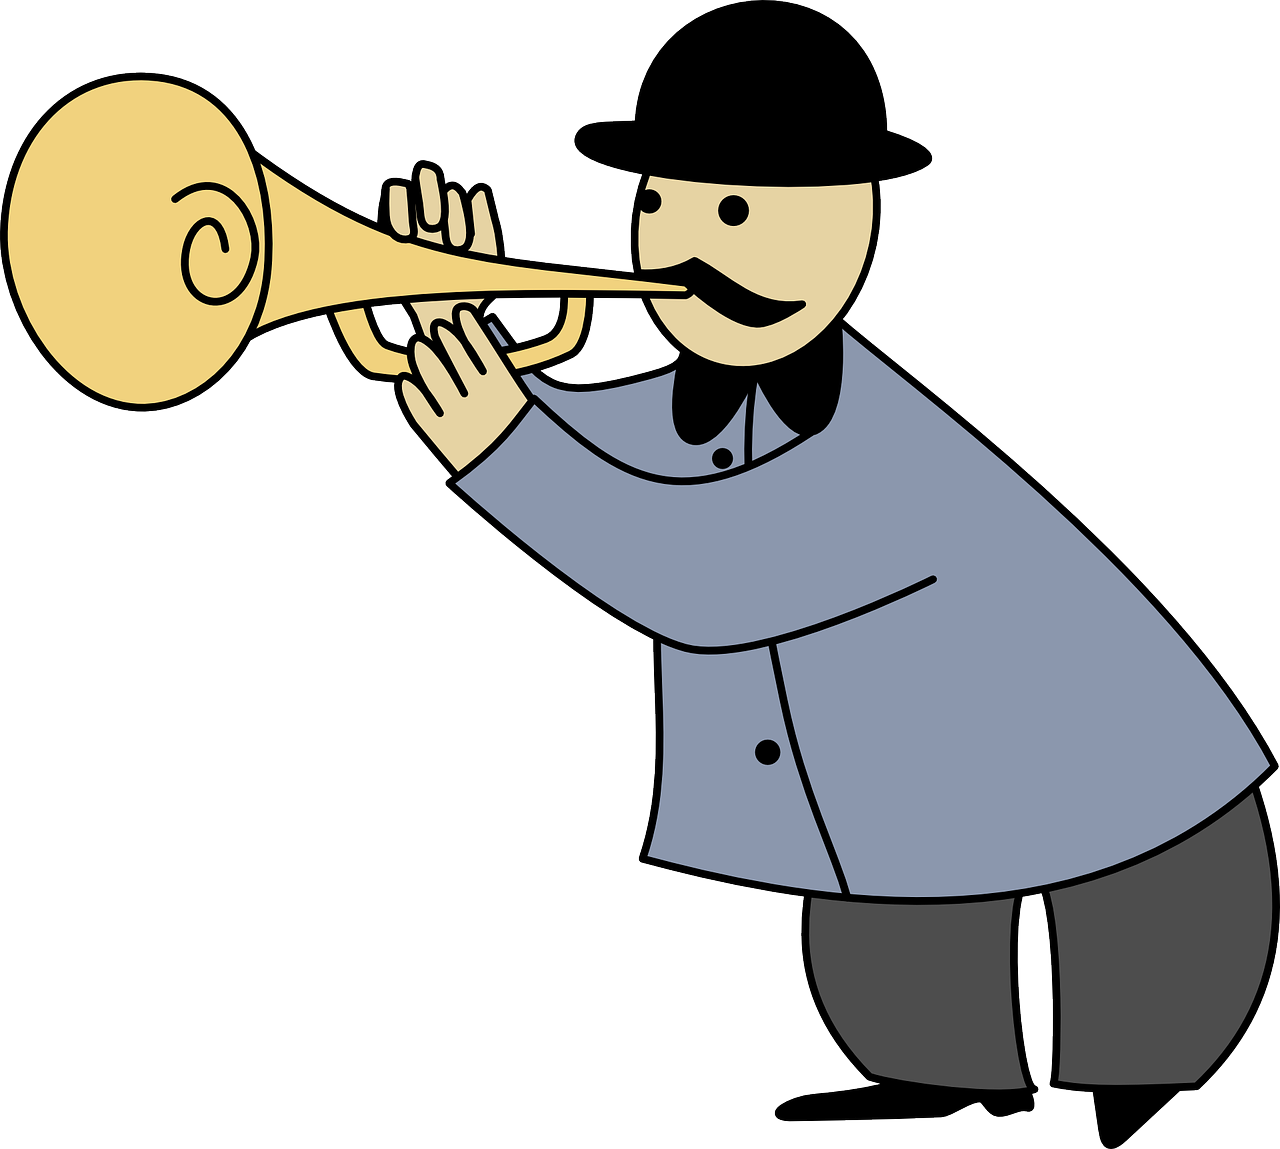 an image of a man playing a trumpet, an illustration of, conceptual art, wikihow illustration, historical footage, mascot illustration, thick mustache